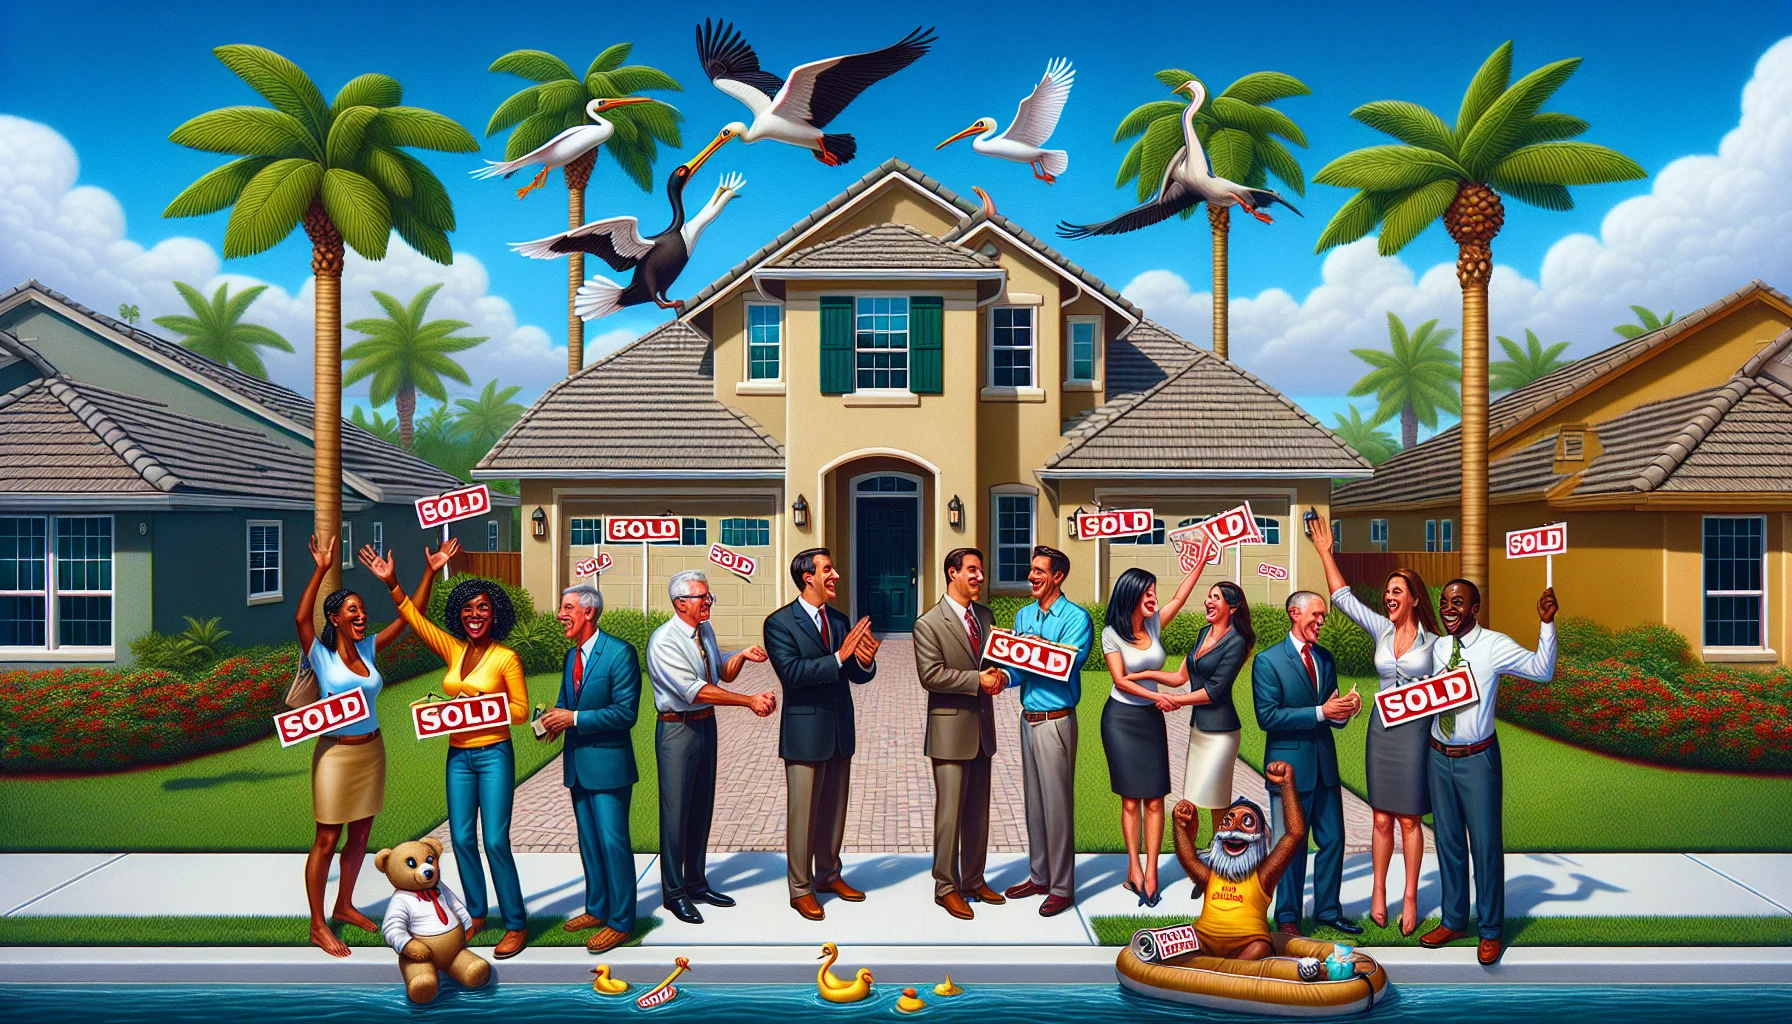 Create a humorous and realistic visual representation of an ideal scenario for the Florida housing market in 2024. Imagine a sunny suburban neighborhood with a lucid blue sky. Mid-scale, stucco homes with green, lush yards show 'Sold' signs in every front yard, hinting at a highly successful real estate boom. Prospective buyers of various descents including, Caucasian, Hispanic, Black, Middle-Eastern, South Asian, are seen joyously celebrating their new home purchases. Also, include some real estate agents, both men and women of different races, patting each other's backs, reflecting prosperous sales and vibrant market interactions. To emphasize the humor, add some palm trees wearing party hats and pelicans delivering scrolls of housing contracts.